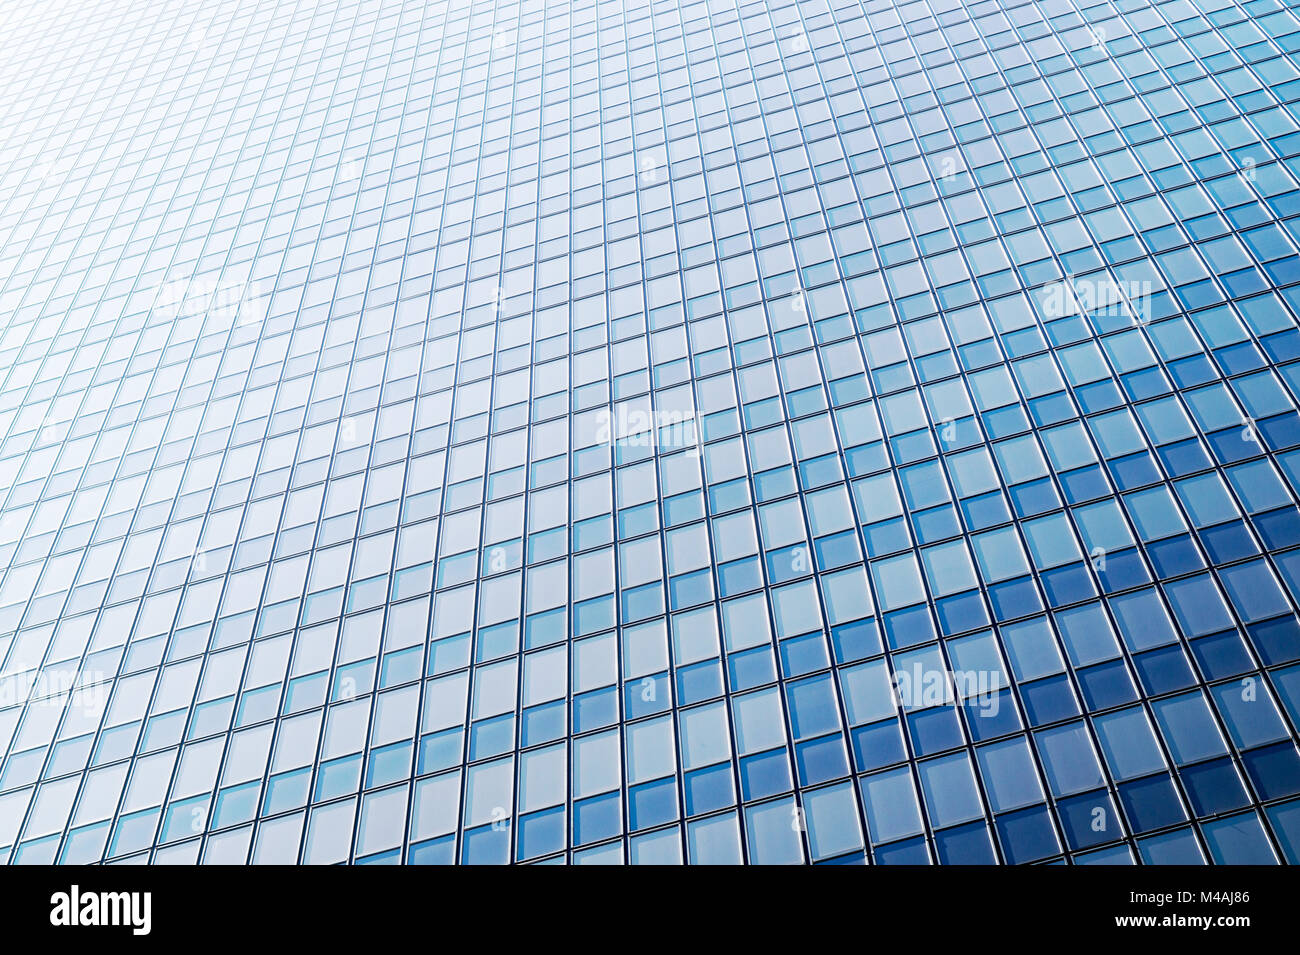 Business office and corporate background. Shiny, new and modern glass building. Window pattern. Stock Photo